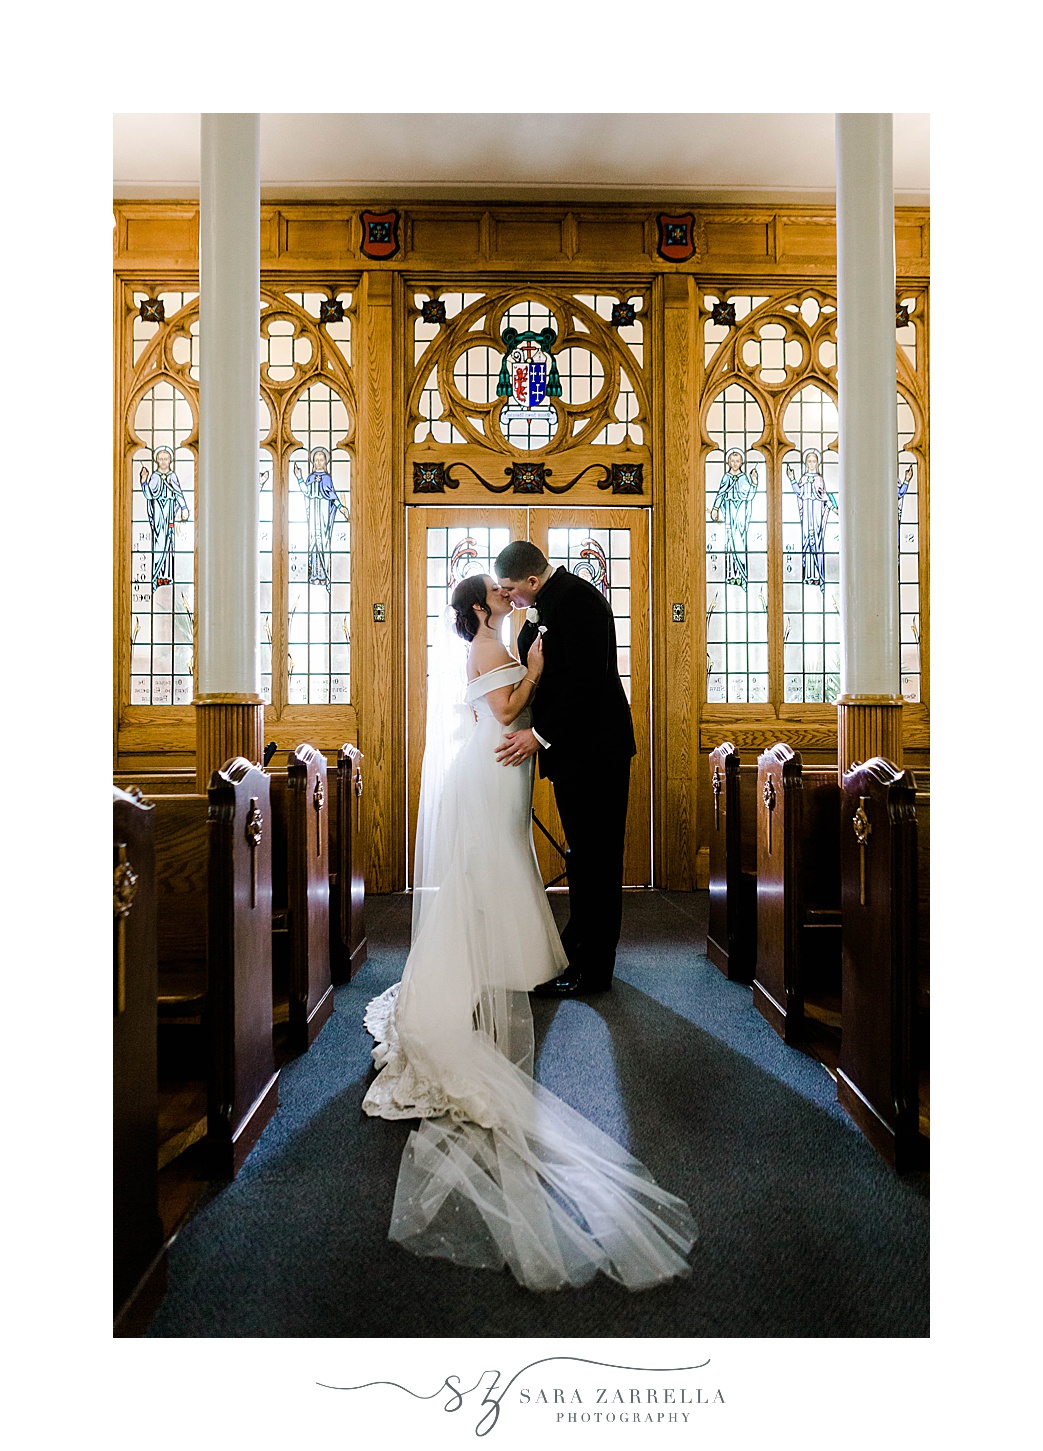 bride and groom kiss under stained glass window at Our Lady of the Rosary